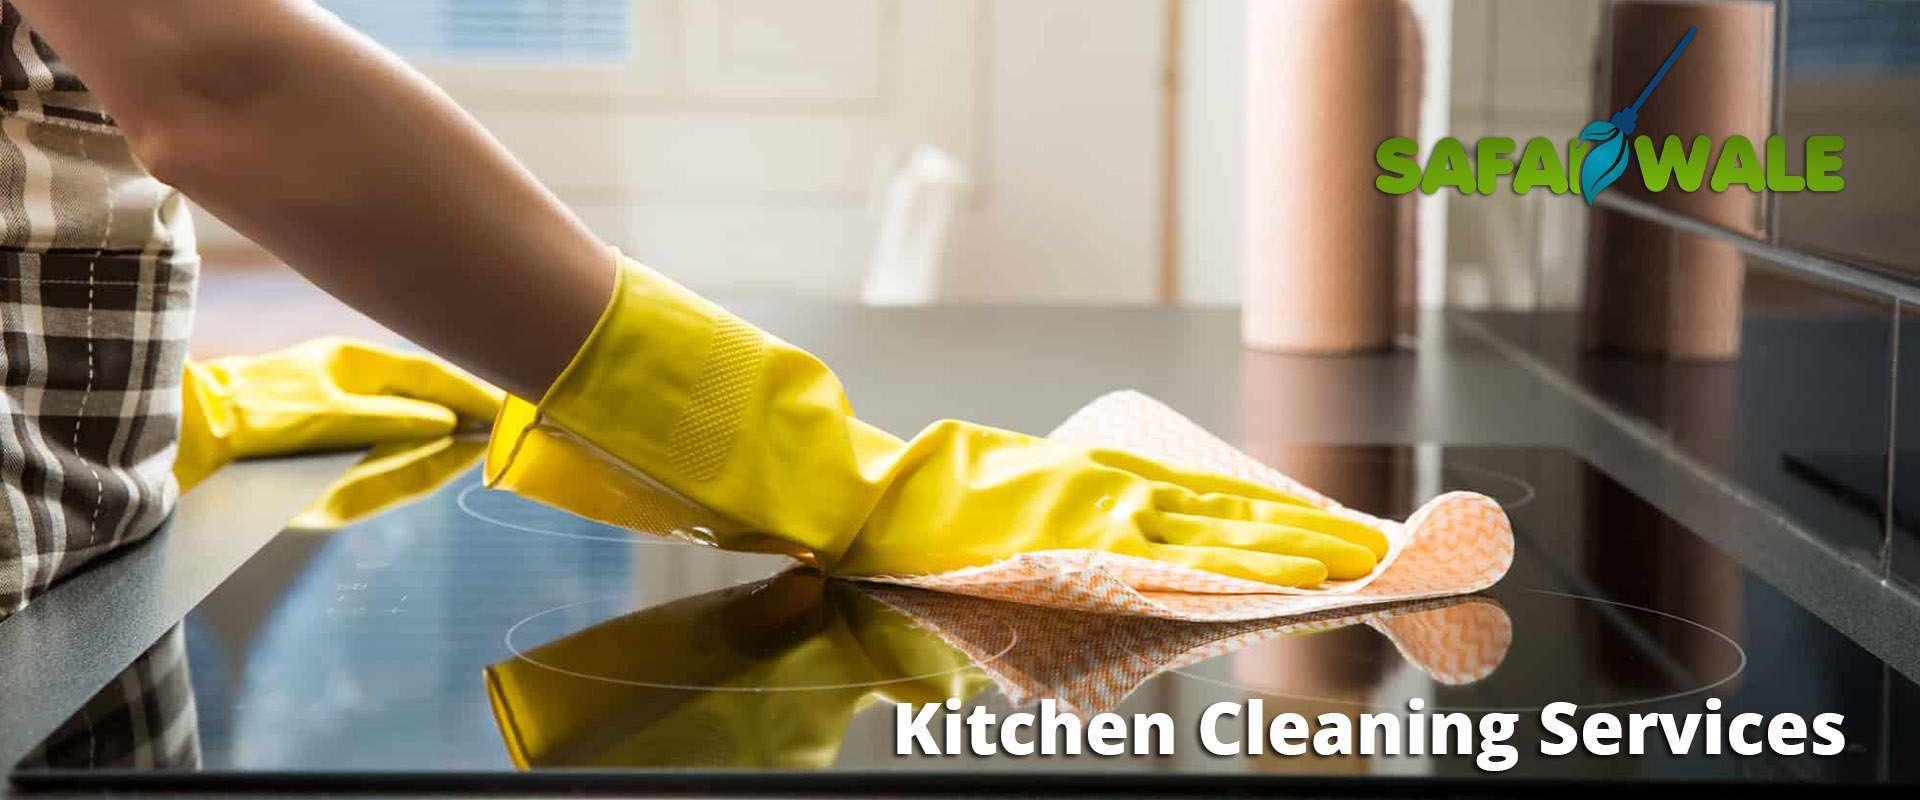 kitchen cleaning services in Mumbai